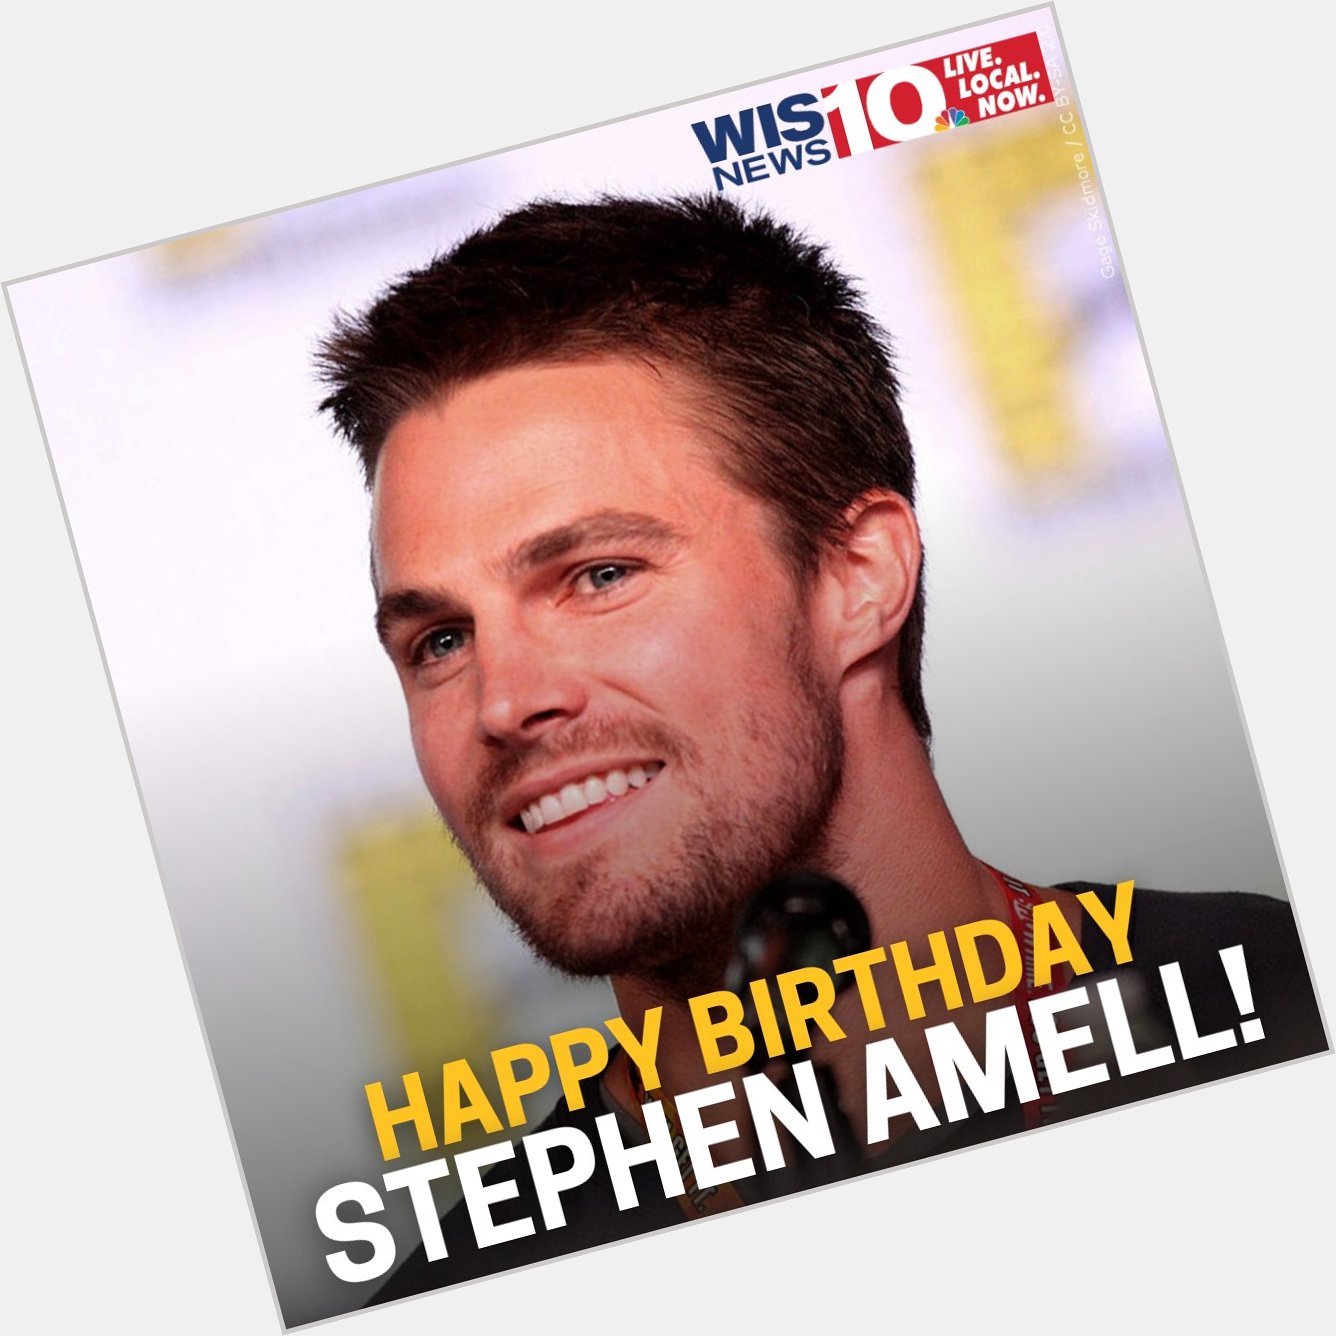 Happy birthday to the Green Arrow, Stephen Amell! 